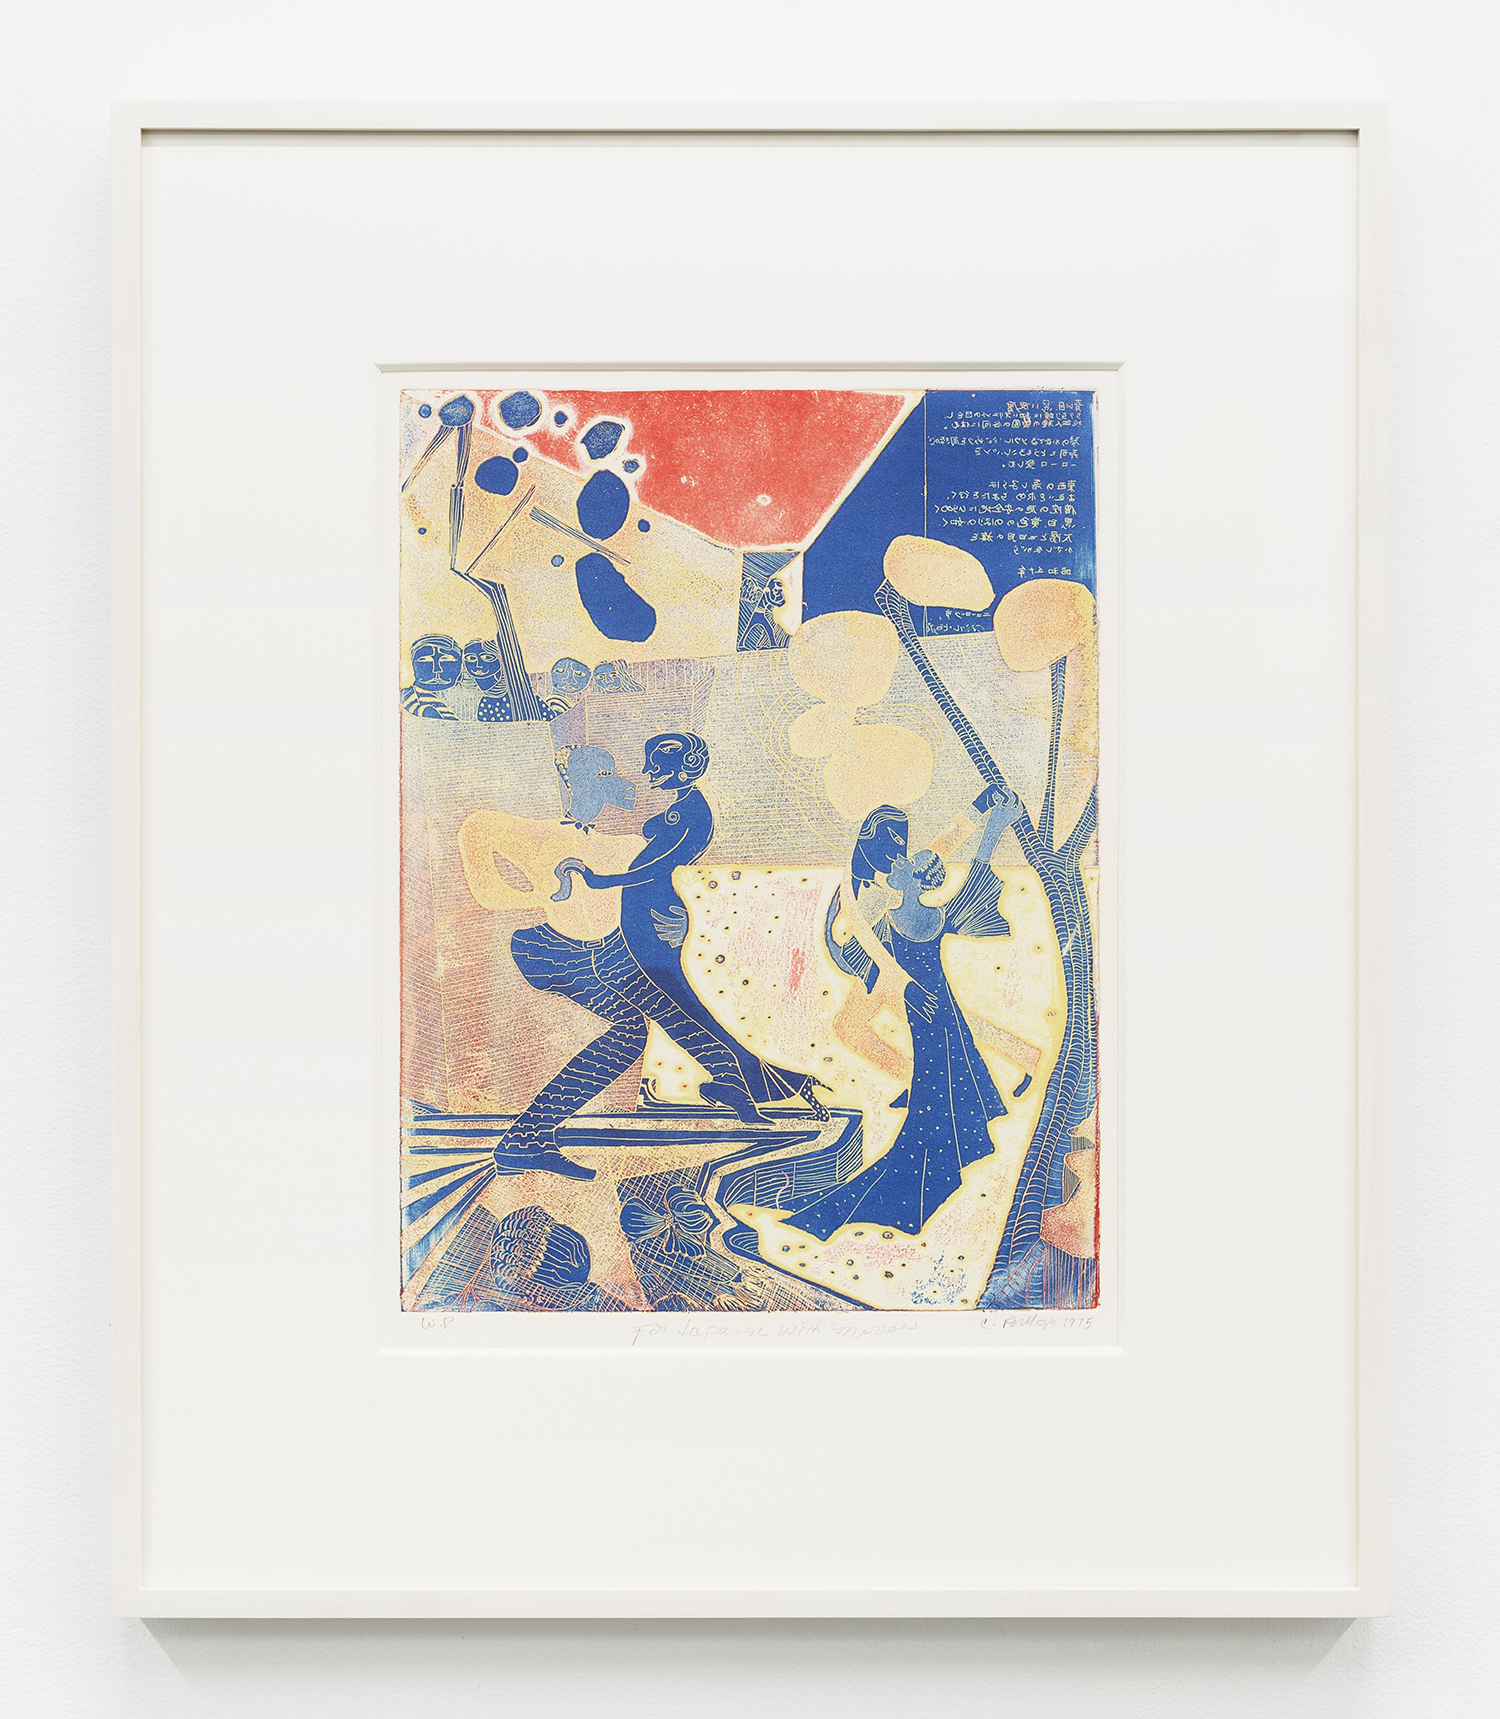 Camille Billops For Japanese with Mirrors, 1975 Etching and aquatint, relief Image Dimensions: 15 3/4 x 12 inches (40 x 30.5 cm) Paper Dimensions: 22 x 15 inches (55.9 x 38.1 cm)